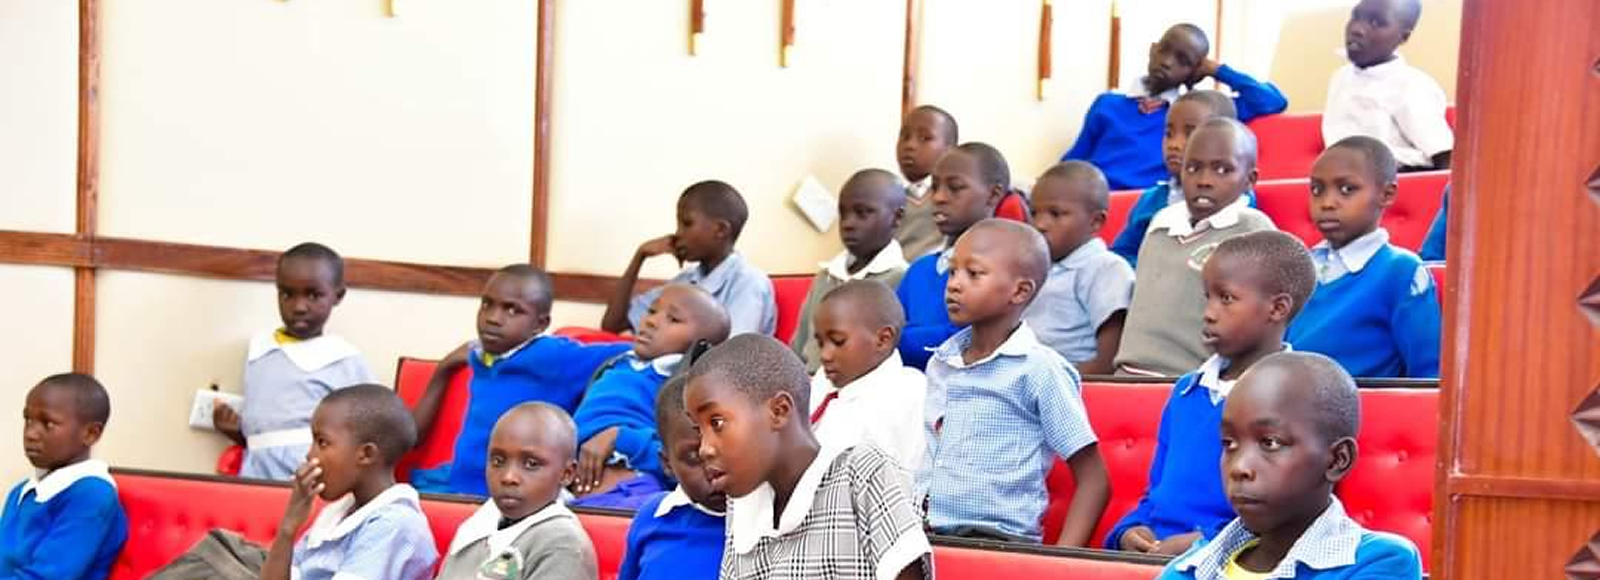 Part of Kapsoo primary school pupils,while on an educational visit at the county Assembly Chambers -Public gallery.